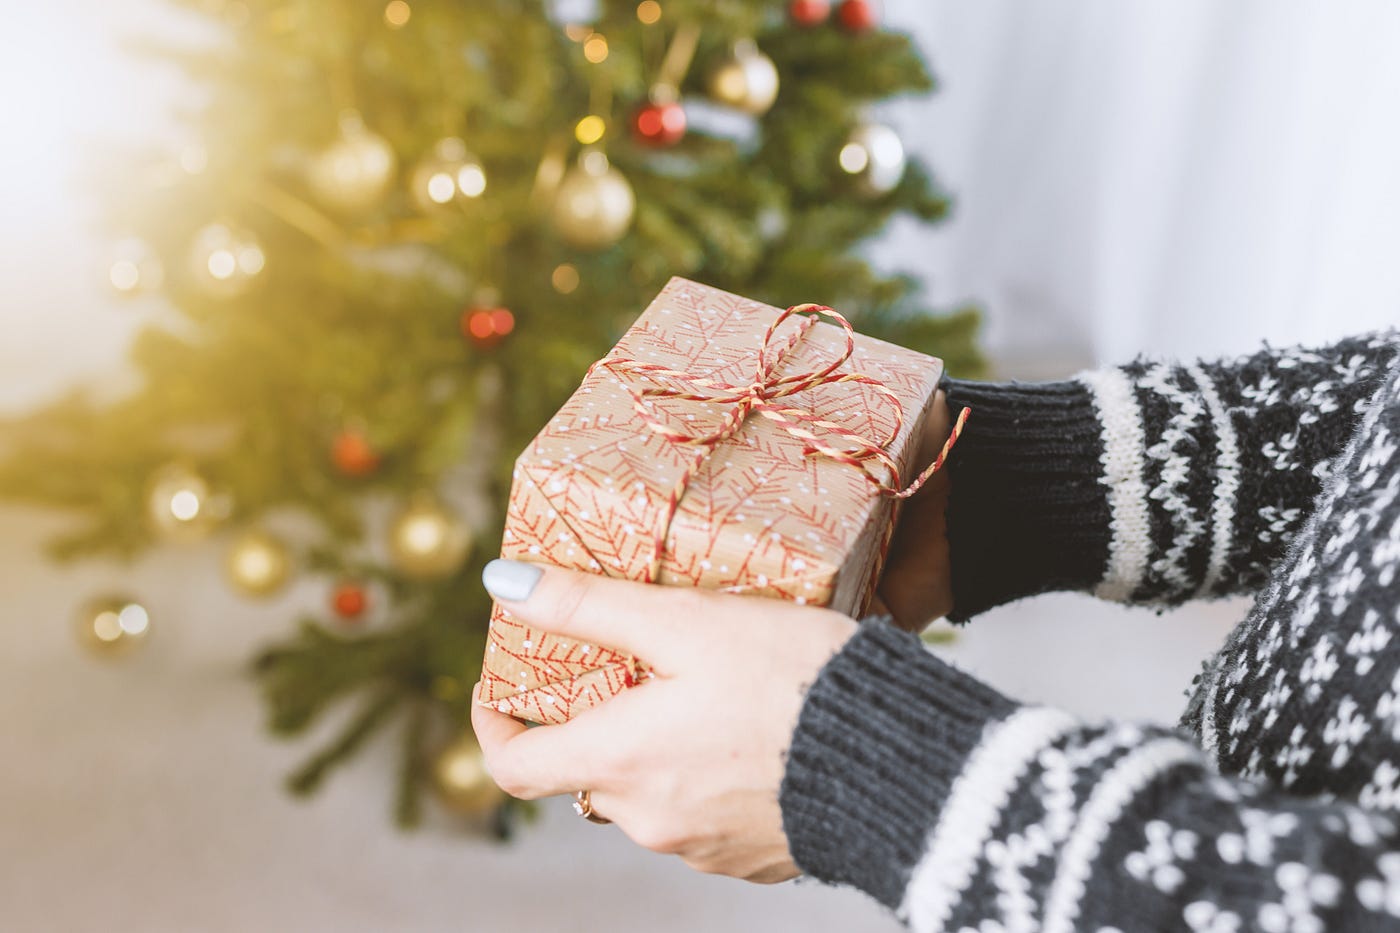 Gift Giving - How to Know if It Is Appropriate And/or Expected?